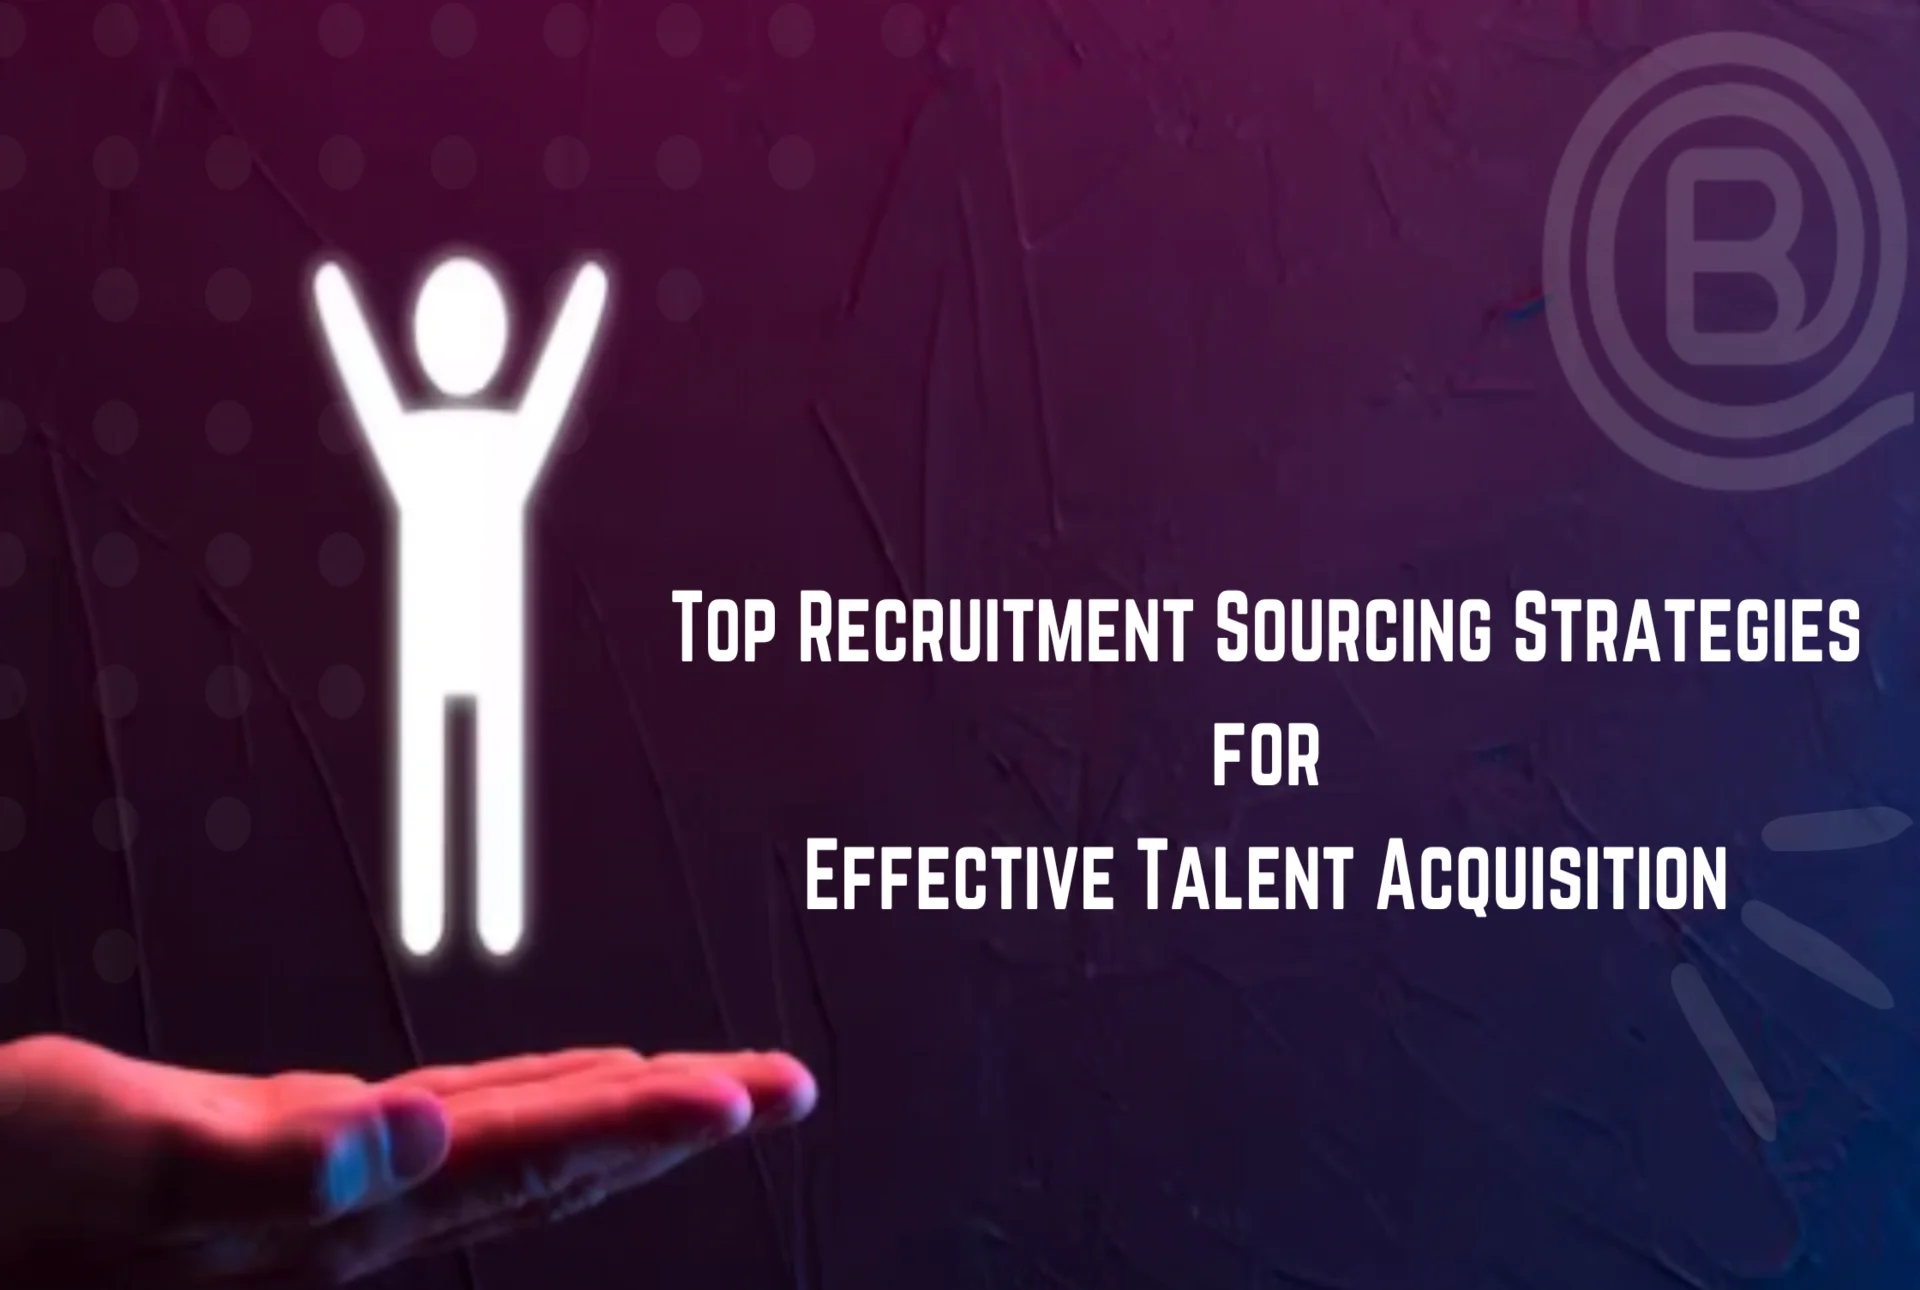 Top Recruitment Sourcing Strategies for Effective Talent Acquisition